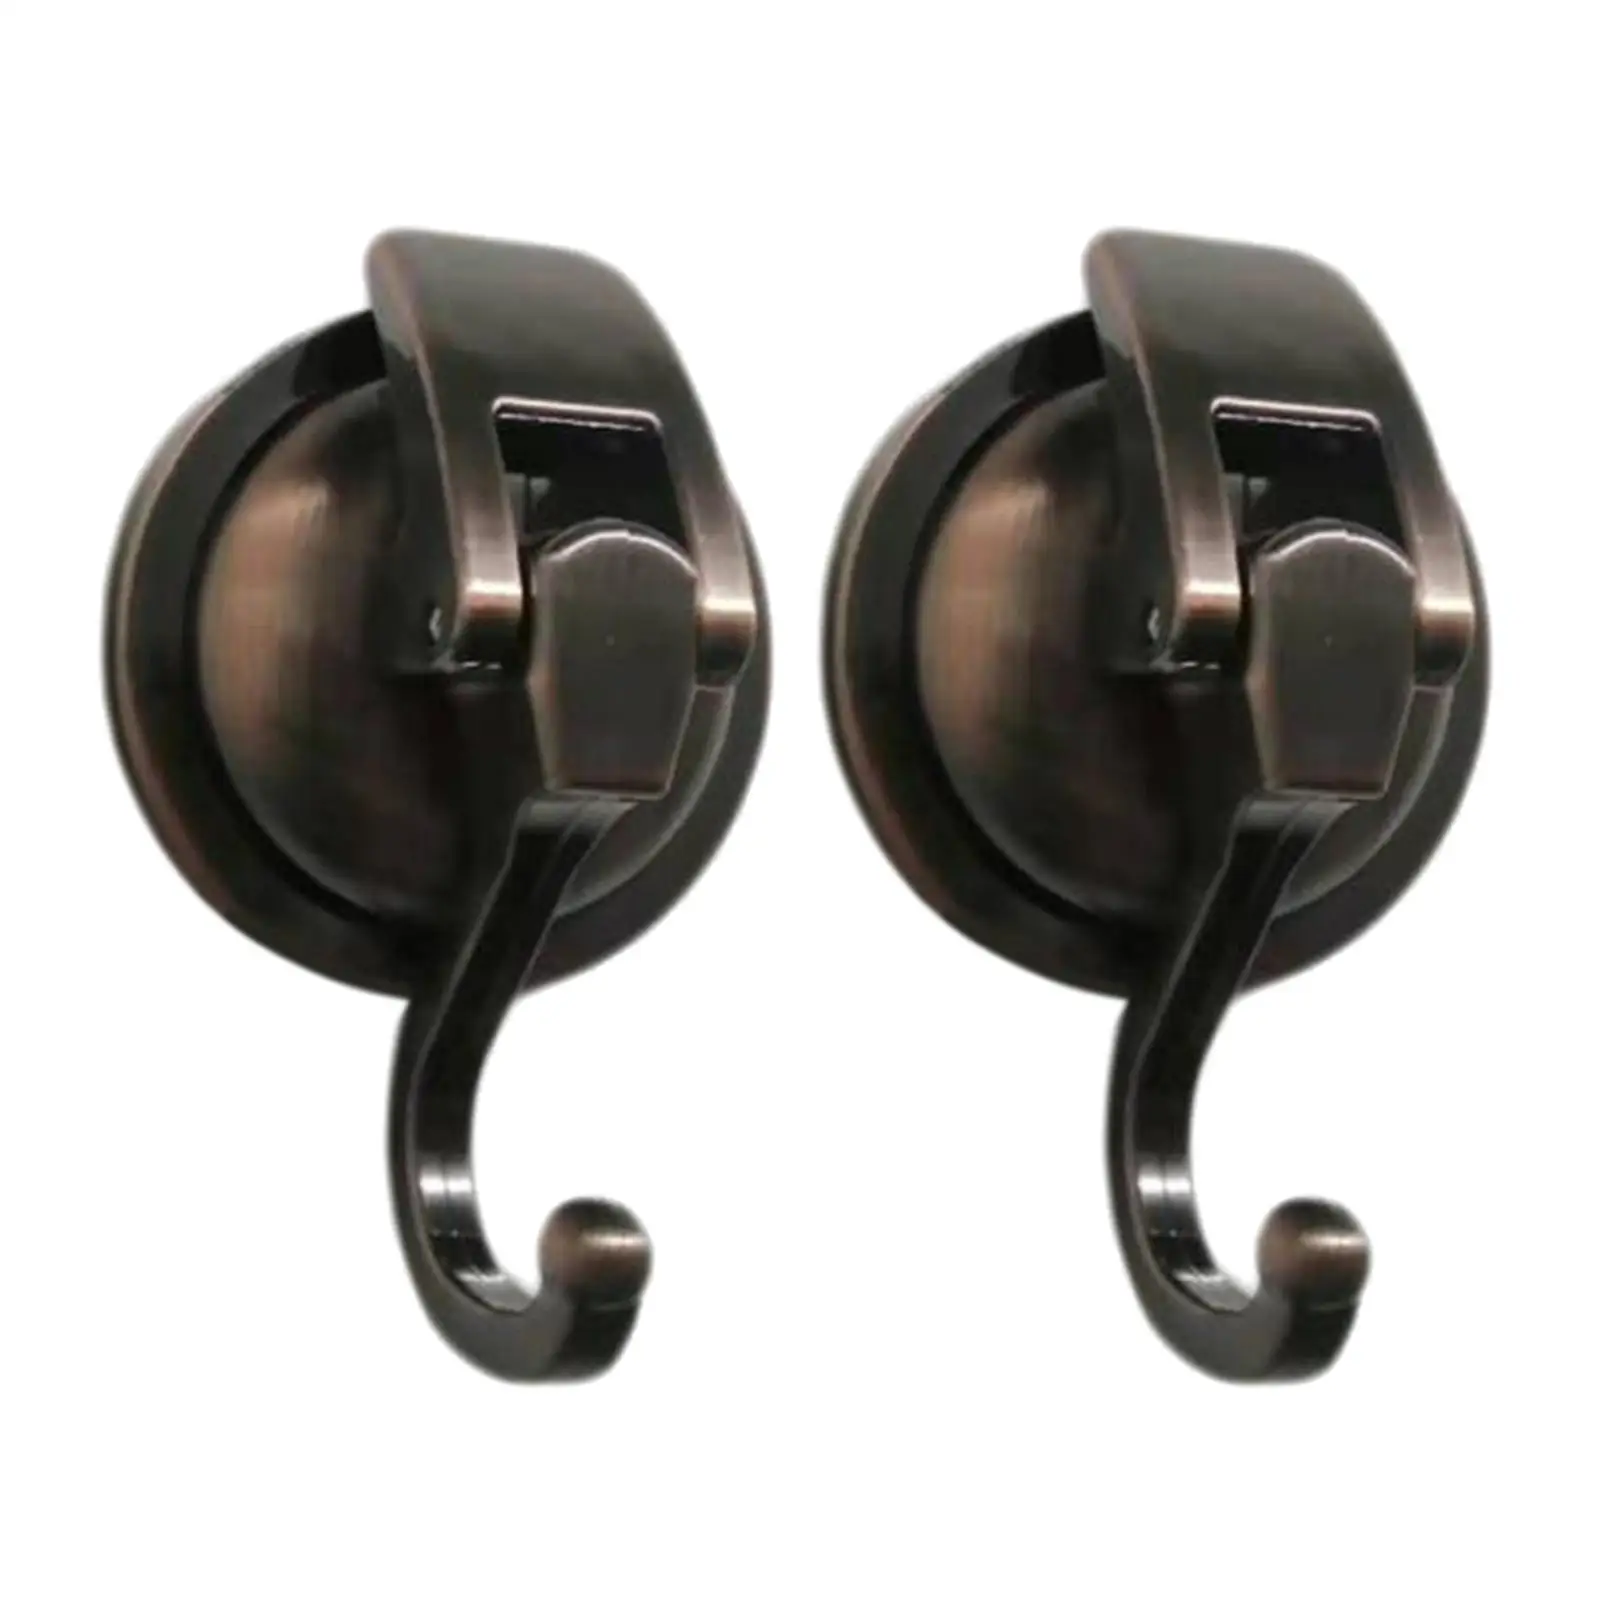 2 Pieces Vacuum Suction Cup Hooks Easy to Instal Drilling Free Wreath Suction Holder Hanger for Glass Door Restroom Bathroom